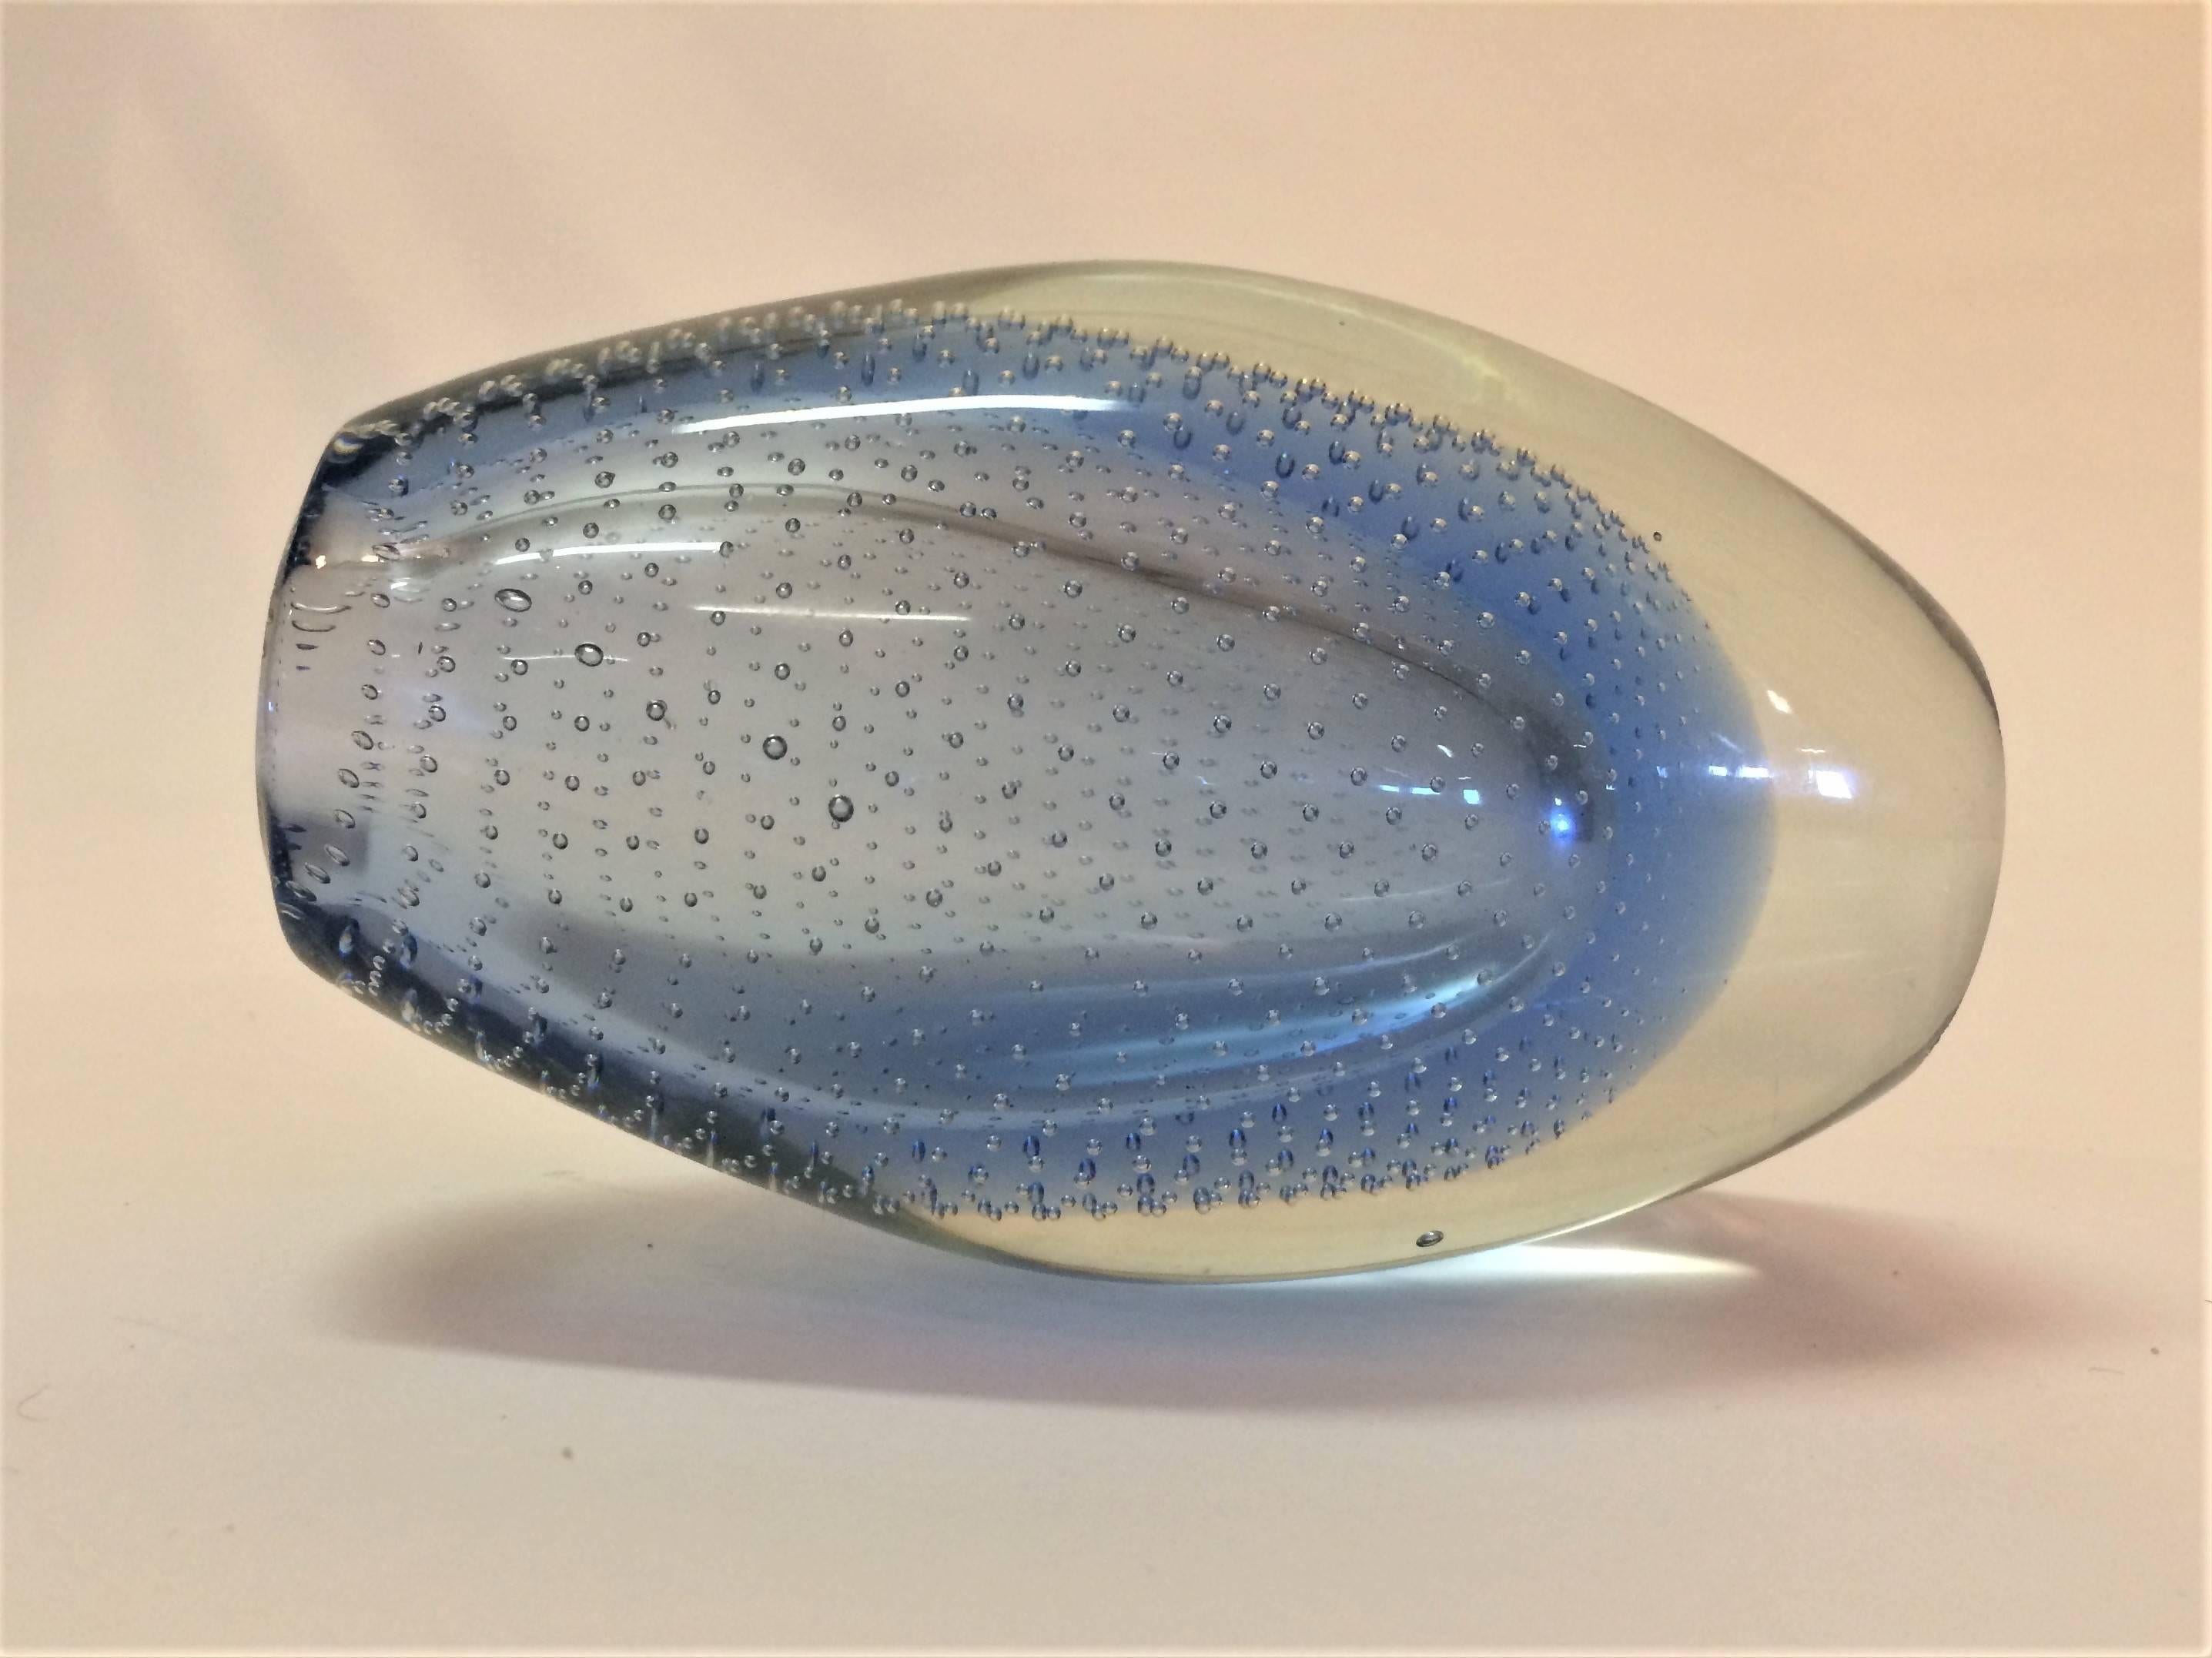 Handblown Finnish Gunnel Nyman attributed glass vase in clear and blue glass, internally decorated with a precise pattern of air bubbles. 

Gunnel Nyman was one of the founders of modern Finnish glass design.
The core characteristic of her glass